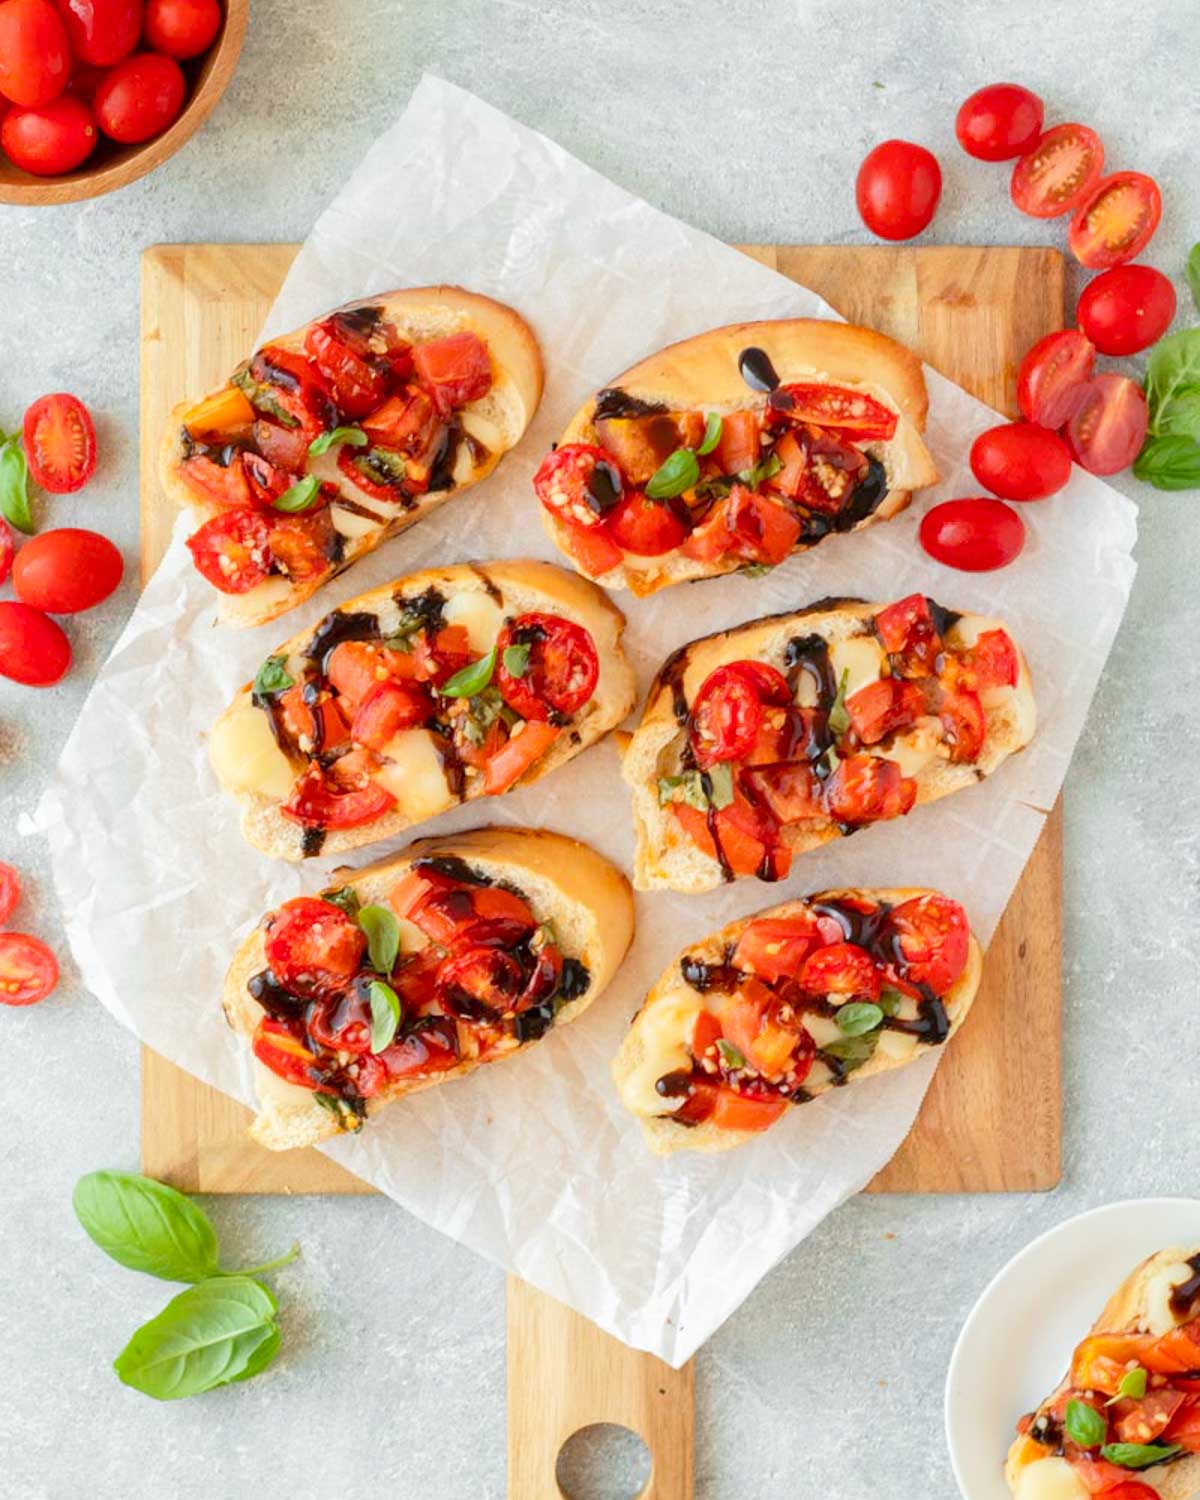 This baked bruschetta is an easy appetizer recipe made with bread topped with creamy mozzarella cheese and a fresh and flavorful mixture of tomatoes, basil and balsamic. This dish is perfect for a holiday appetizer, easy summer recipe and a great Fourth of July cookout recipe.